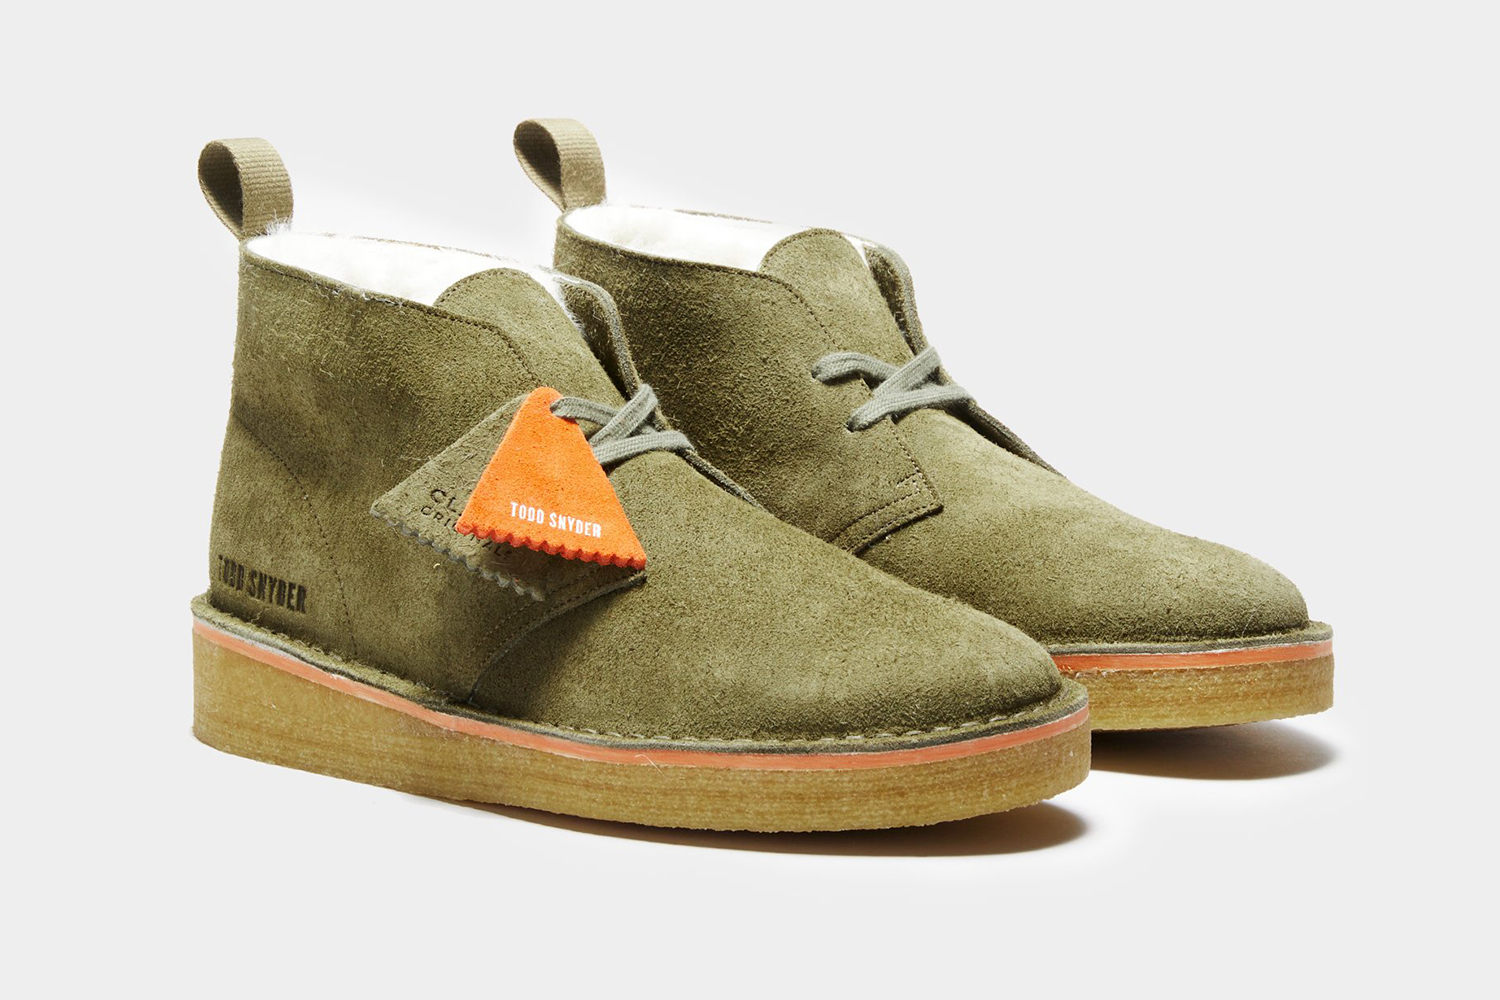 Todd Snyder x Clarks Shearling Desert Boot in Olive